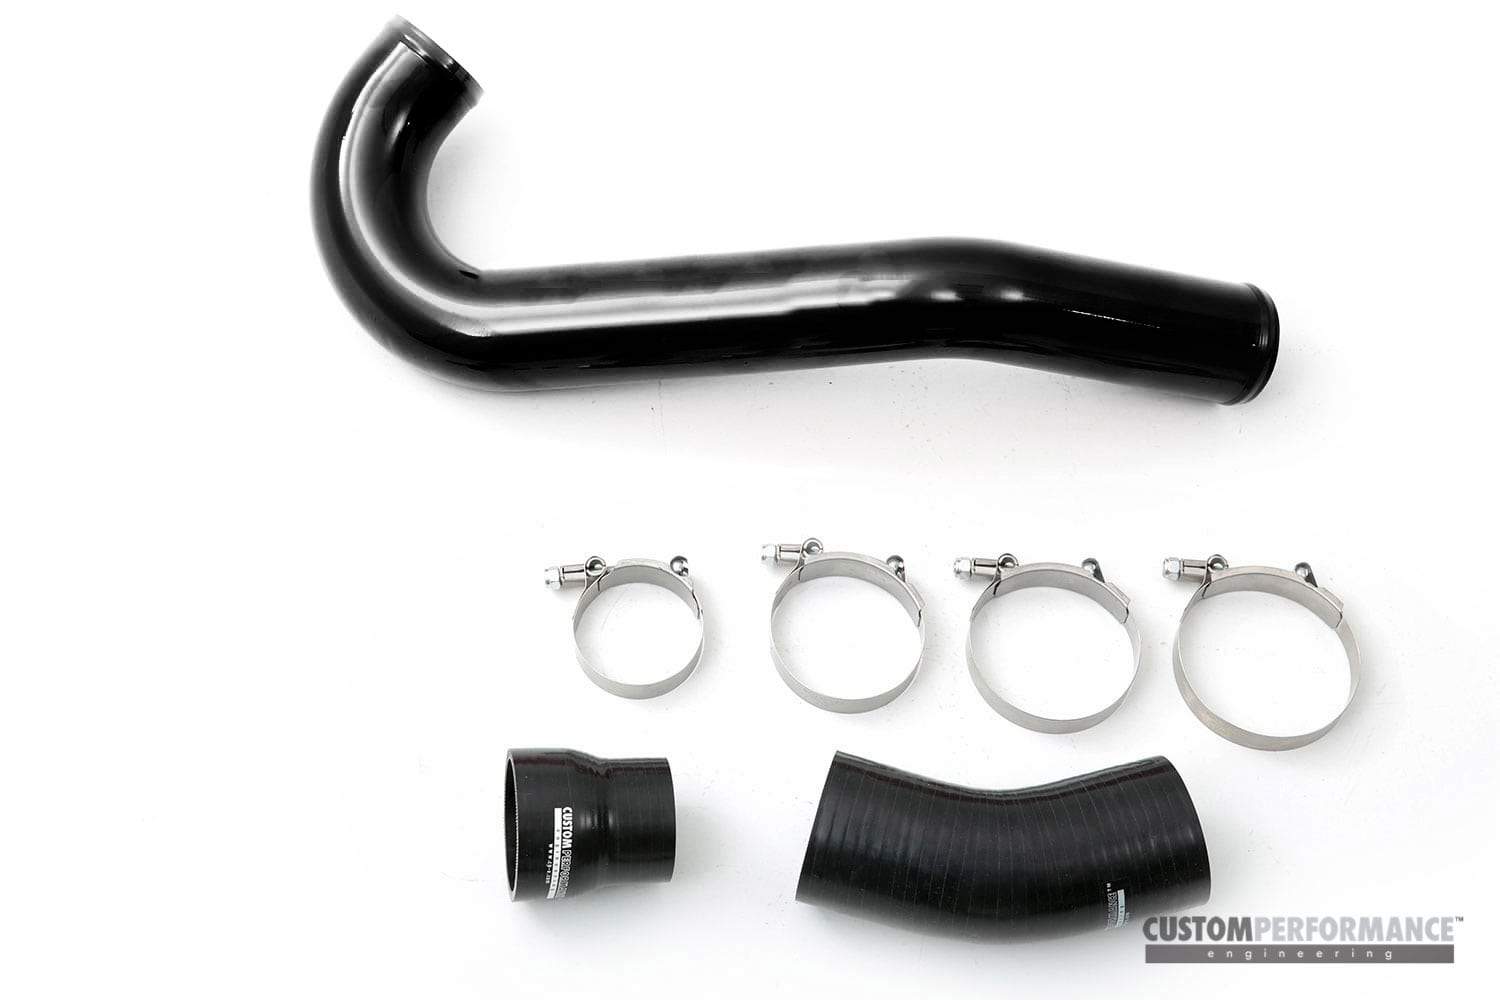 CP-E "Hotcharge" Mustang EcoBoost Hot-Side Charge Pipe